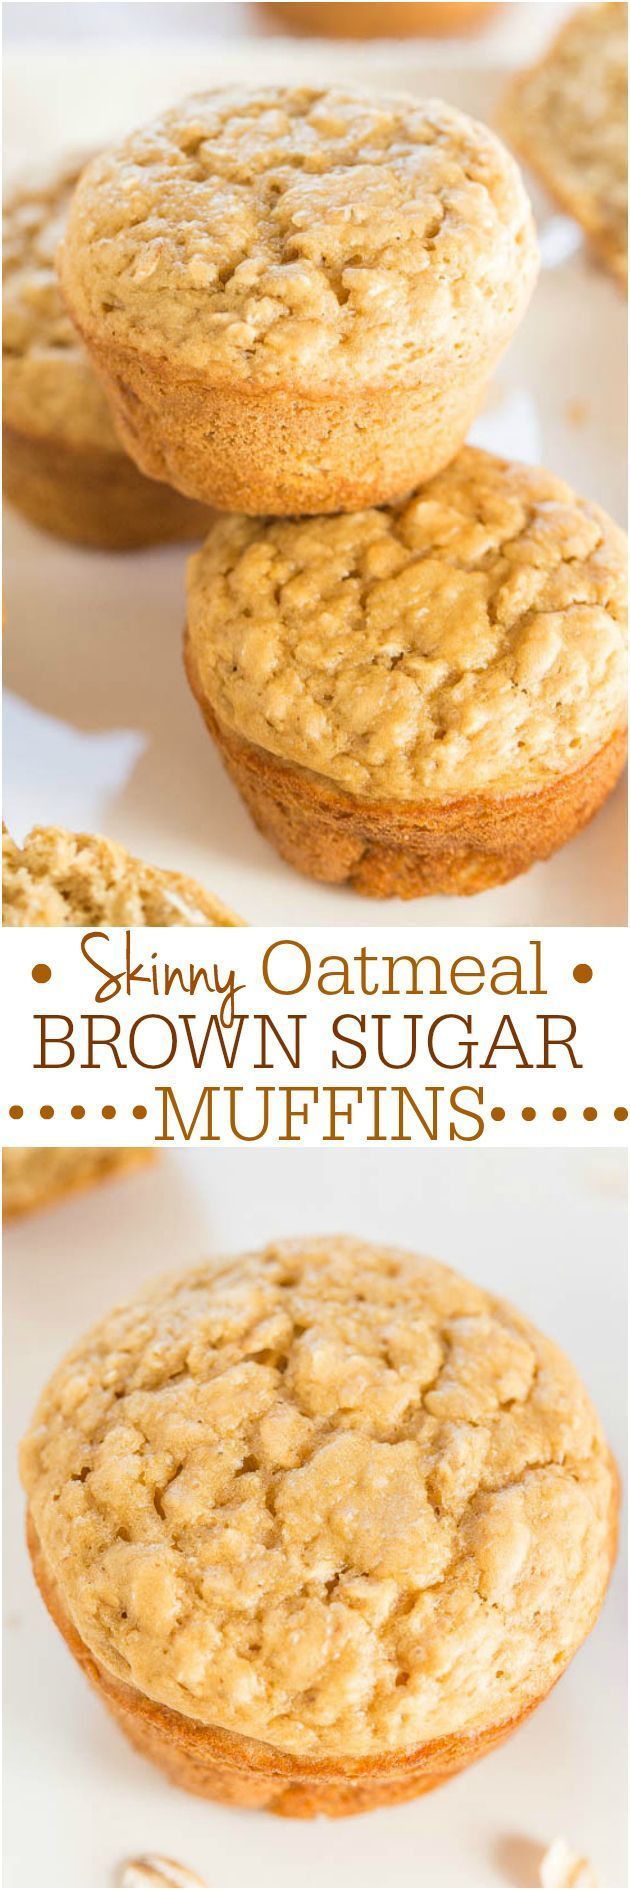 Skinny Oatmeal Brown Sugar Muffins – No oil, butter, or dairy, and just 1/4 cup brown sugar in the entire batch! Healthy, skinny